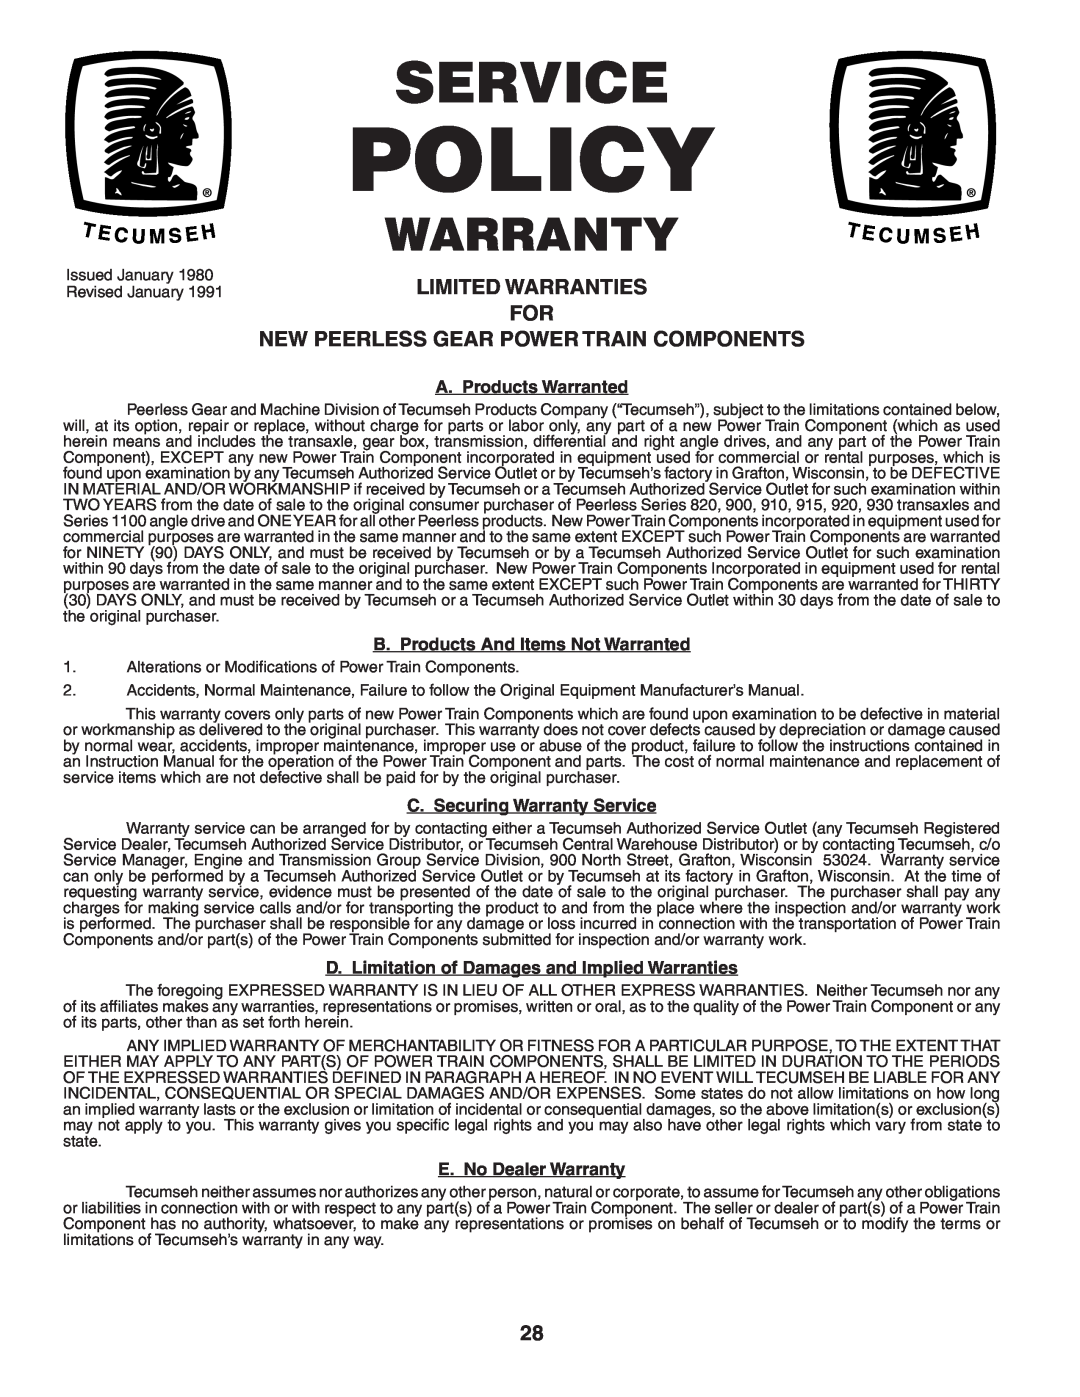 Poulan 194992 manual Limited Warranties For New Peerless Gear Power Train Components, Policy, Service, Warranty 